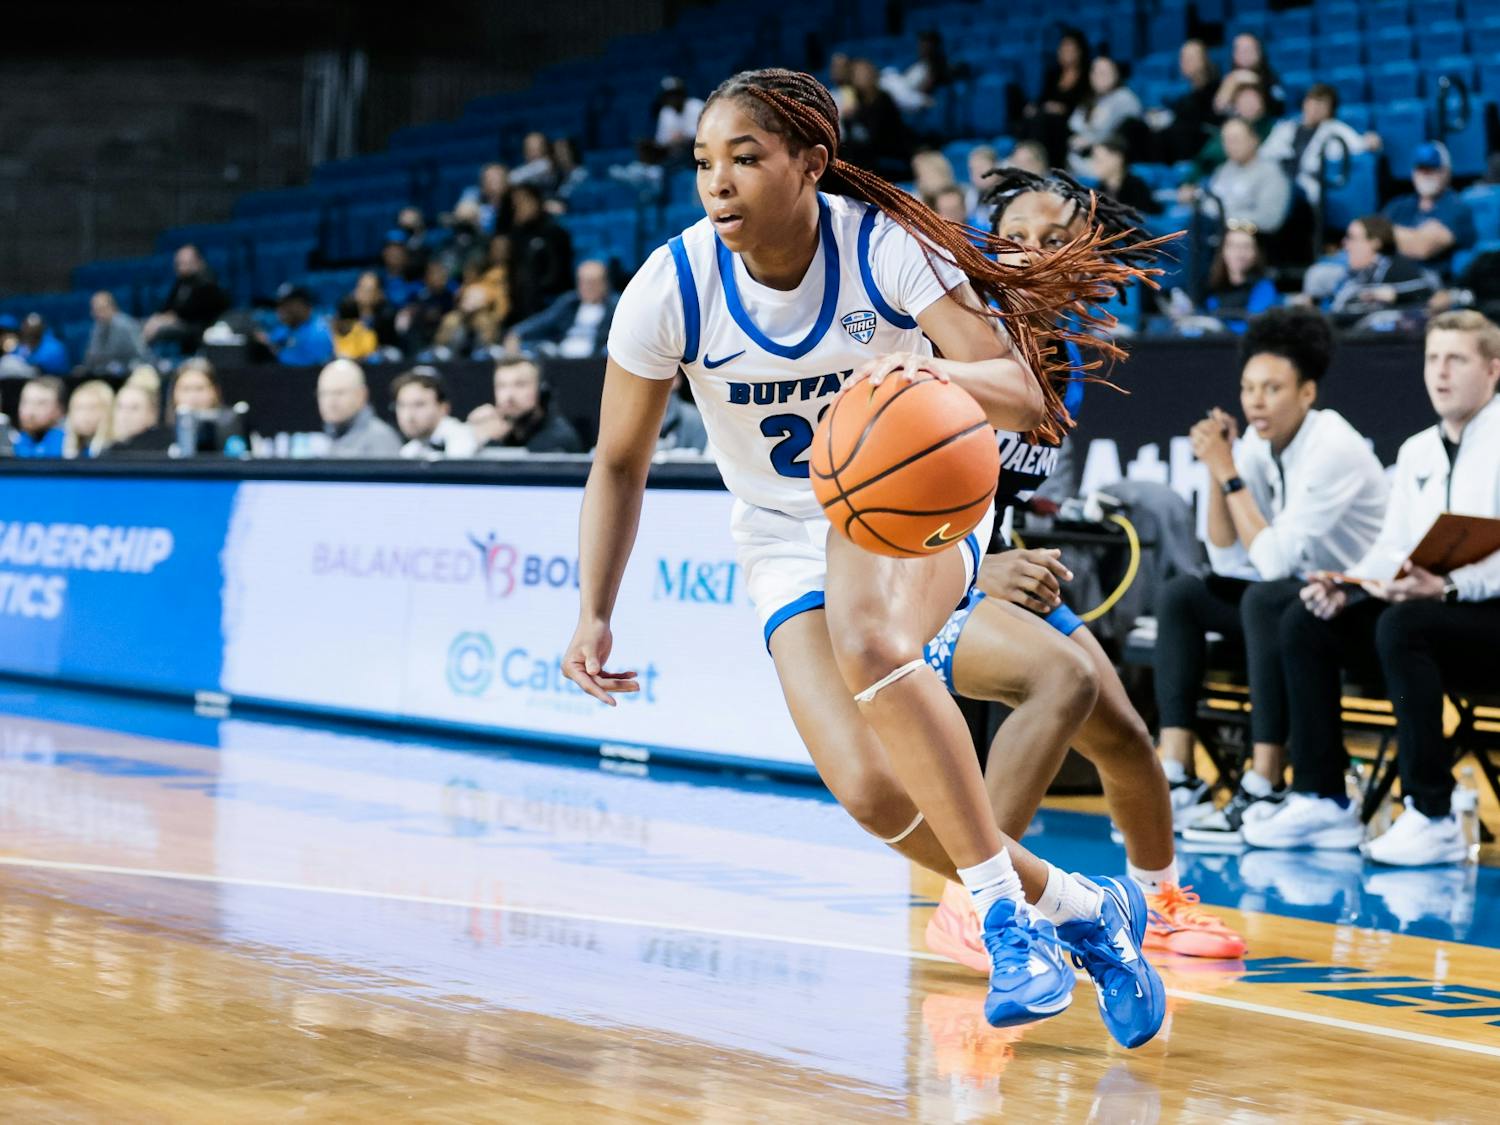 &nbsp;Fifth-year guard Re’Shawna Stone scored 17 points for the Bulls Thursday.